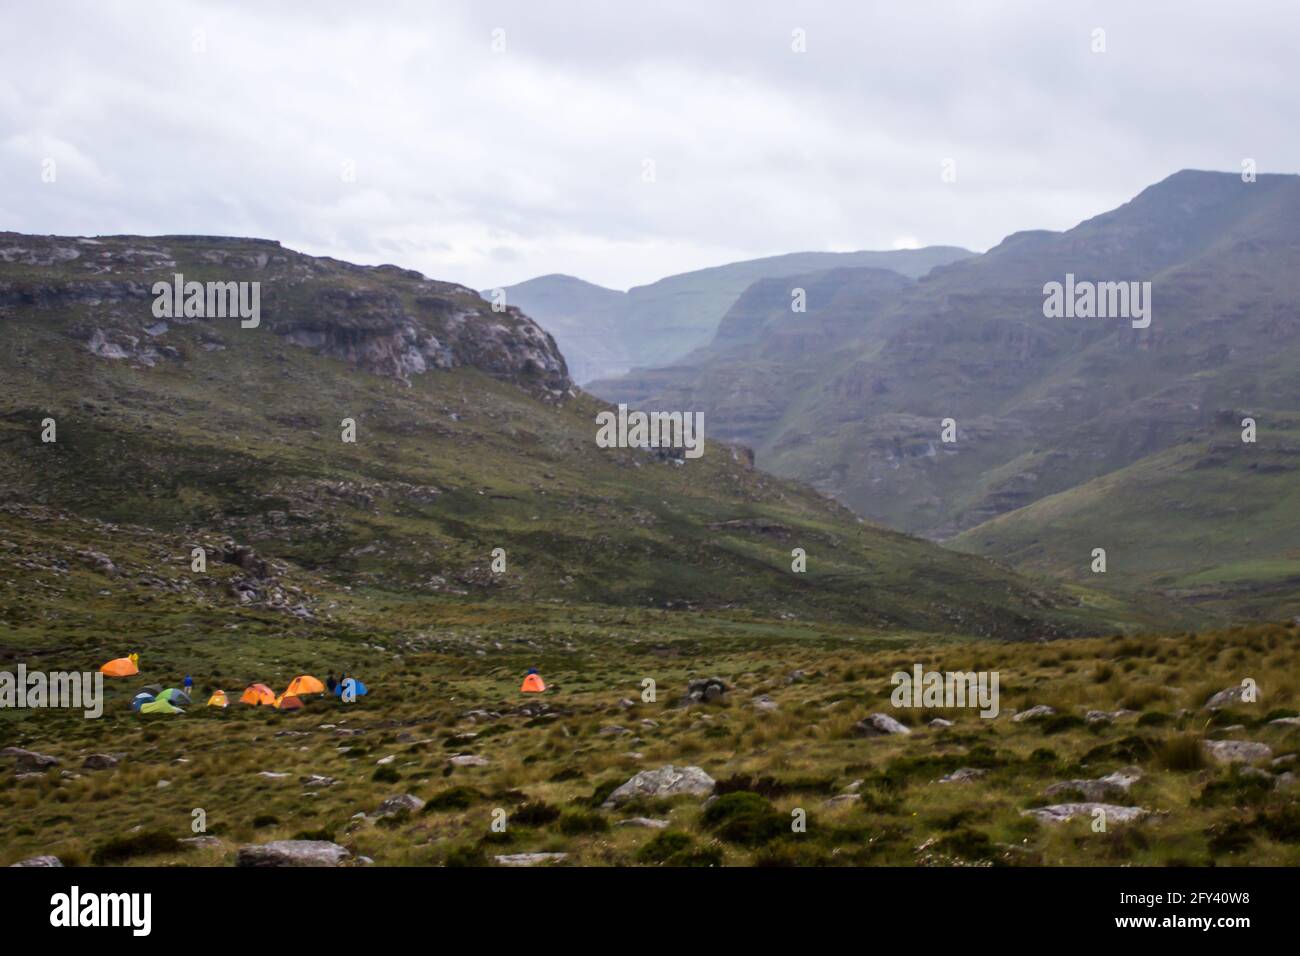 A group of brightly colored hikers tents in a remote part of the Upper Drakensberg Mountains on the border between South Africa and Lesotho. The quick Stock Photo